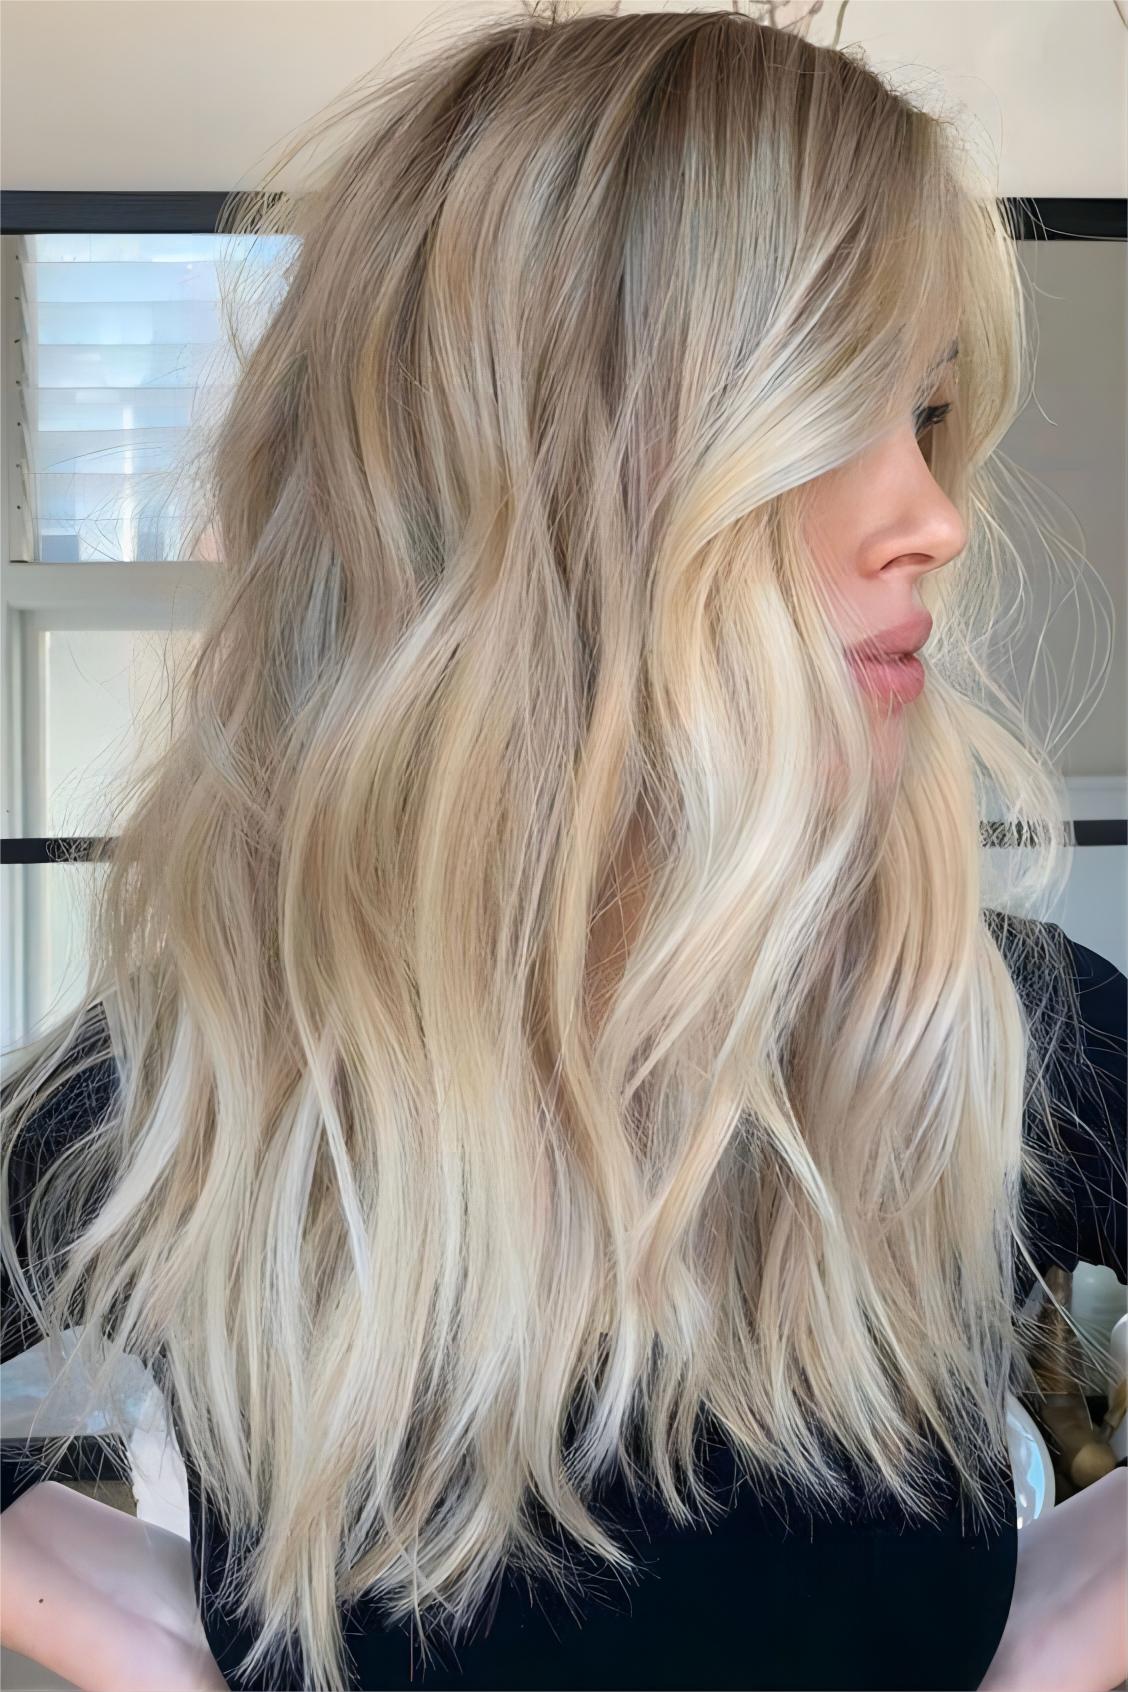 36 Fabulous Blonde Hair Color Ideas for a Natural Look - WigShe